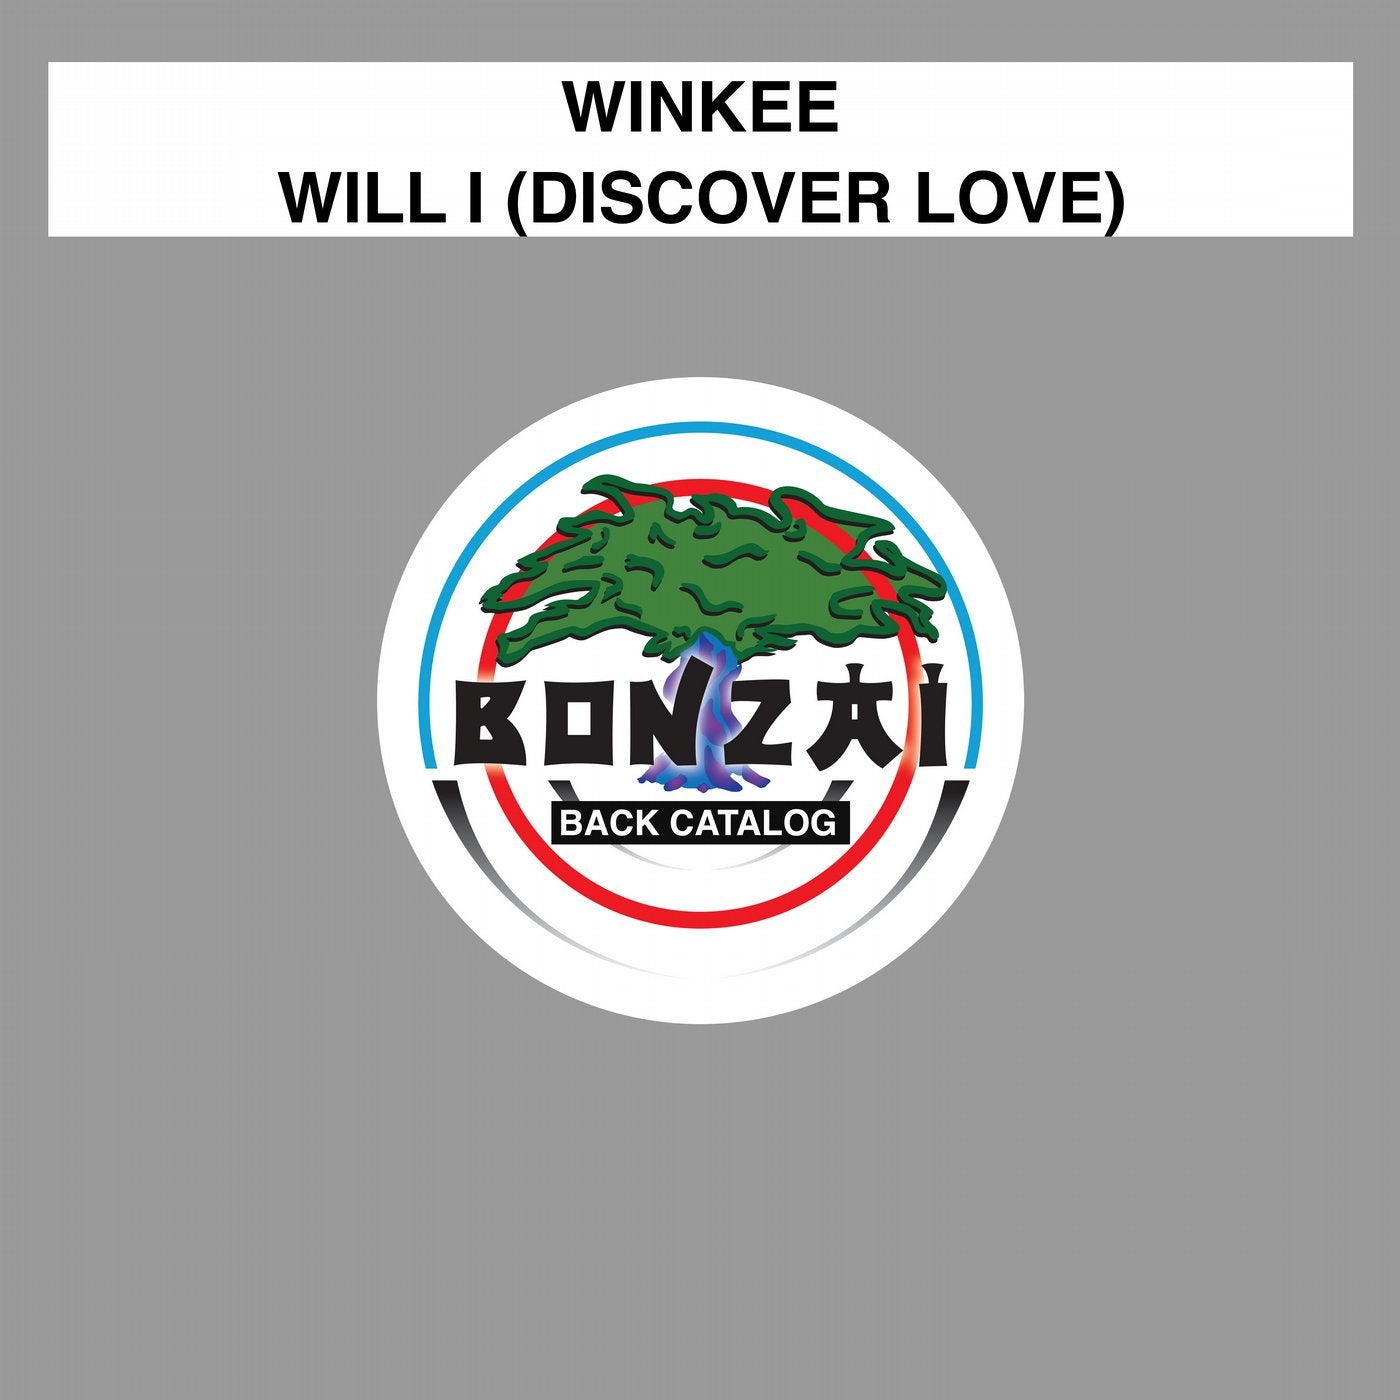 Will I (Discover Love)